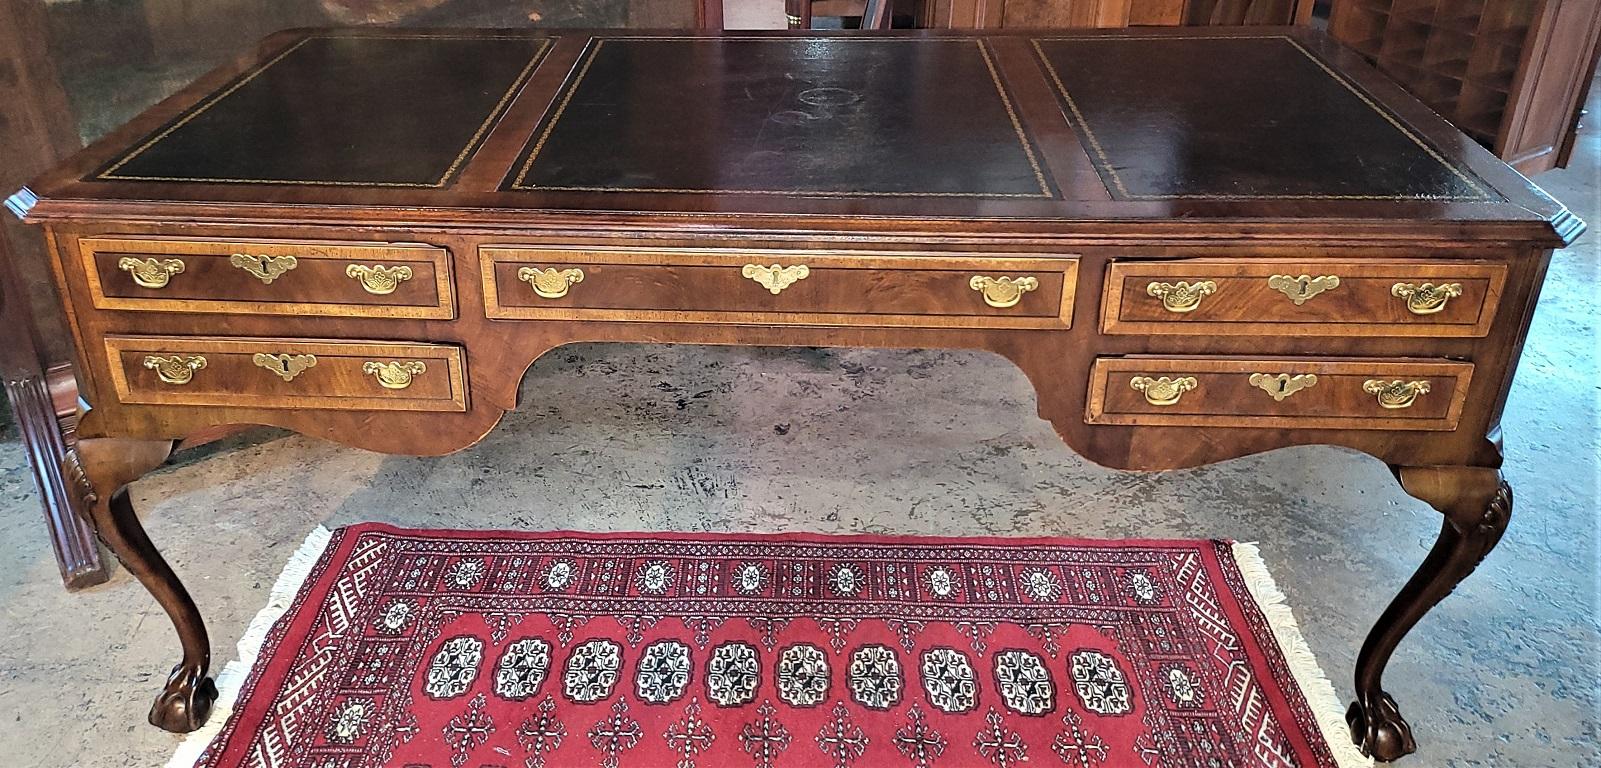 Presenting a lovely Irish George II Style Henredon desk.

Made by the famous maker, Henredon of Morganton, North Carolina circa 1945-50.

Famous for making high quality reproduction furniture using the style and exceptional quality designs of